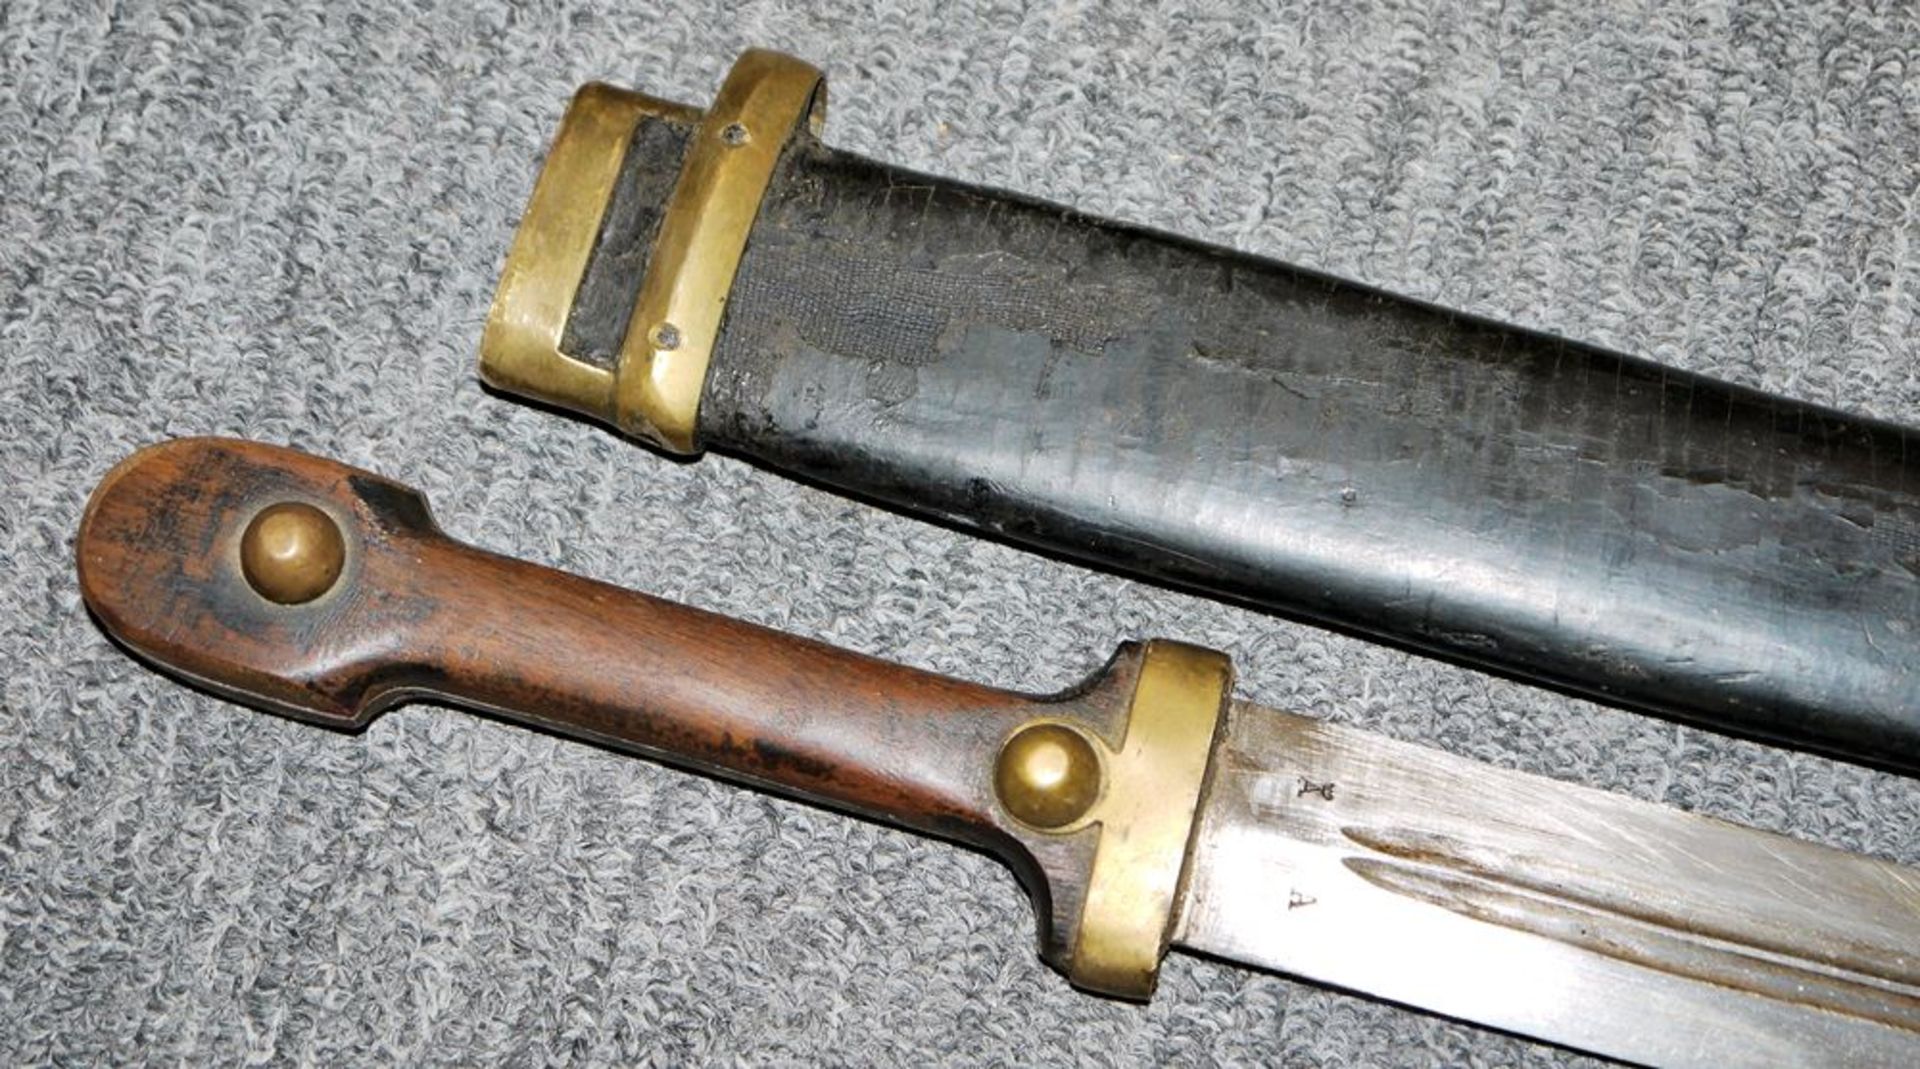 Kindjal with scabbard, Rußland 1911 - Image 2 of 3